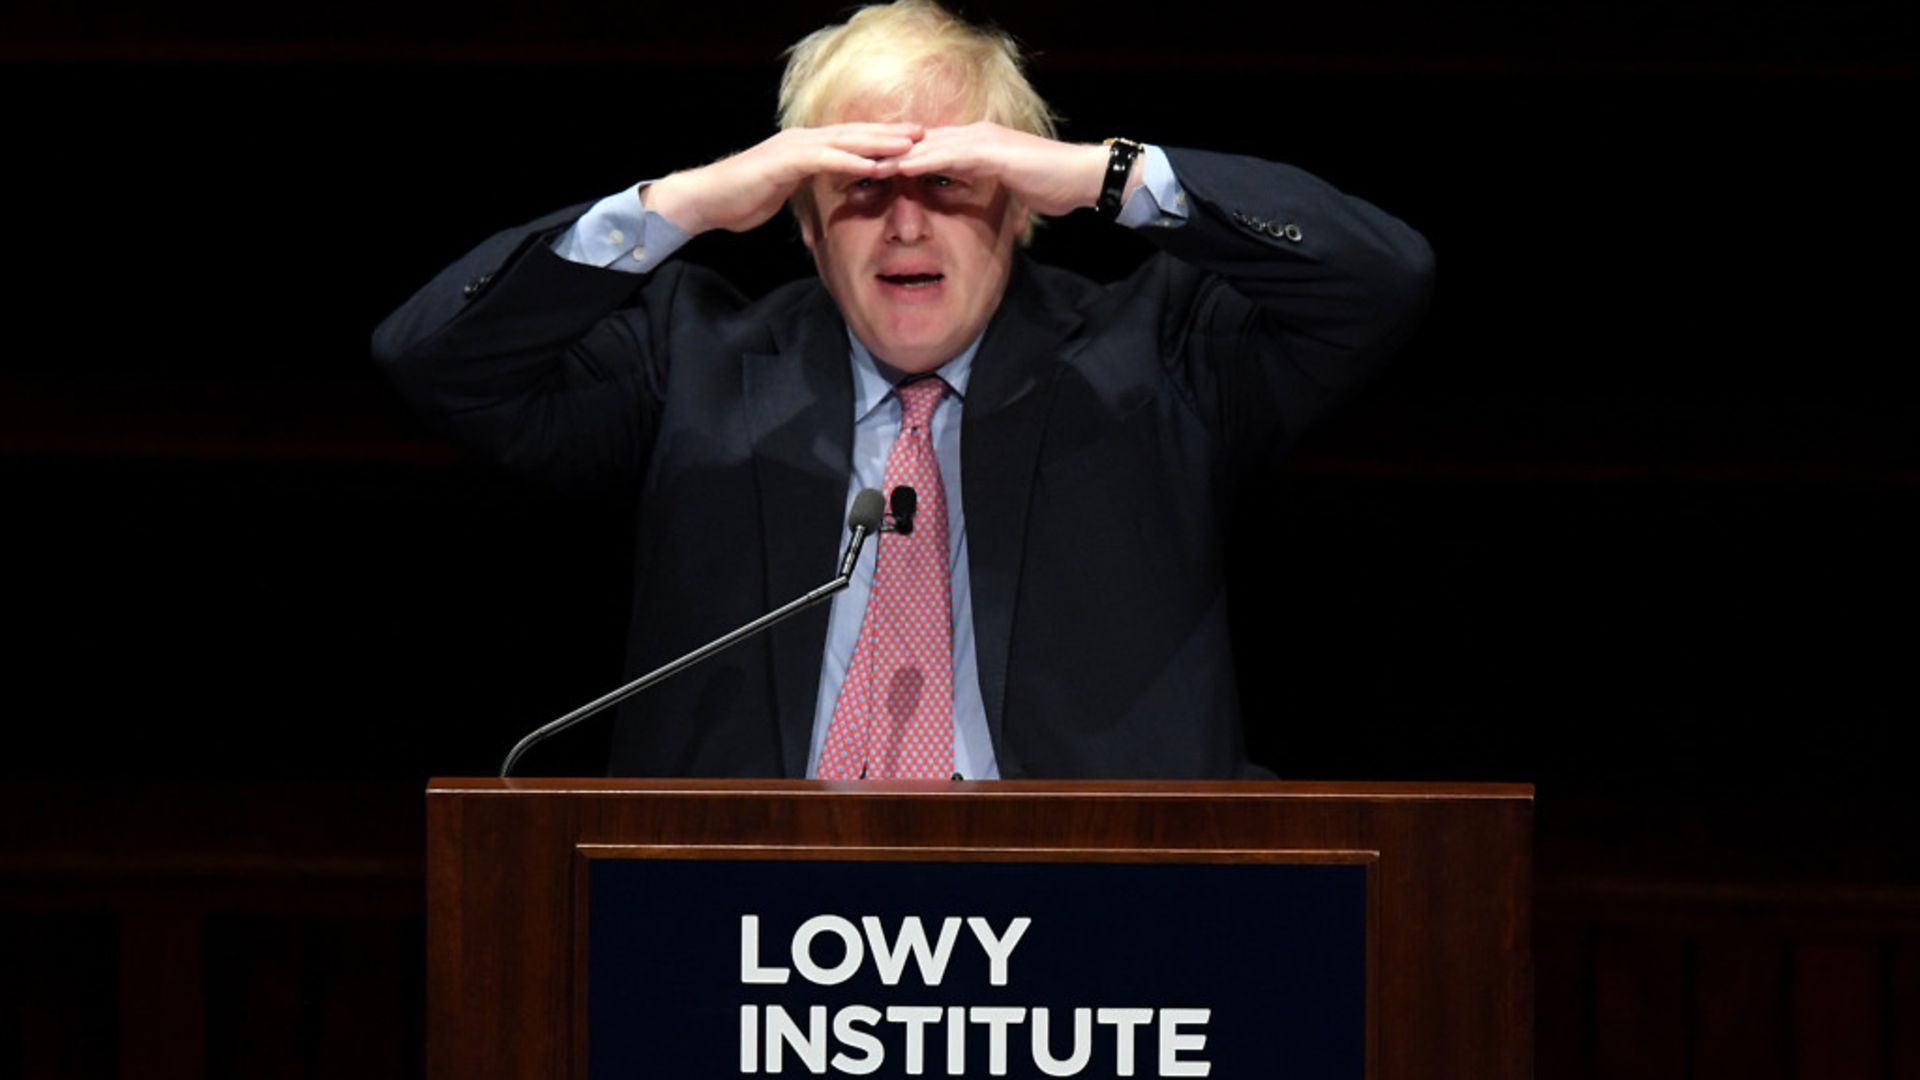 Foreign Secretary Boris Johnson delivers the Lowy Lecture, at Sydney Town Hall - Credit: AAP/PA Images